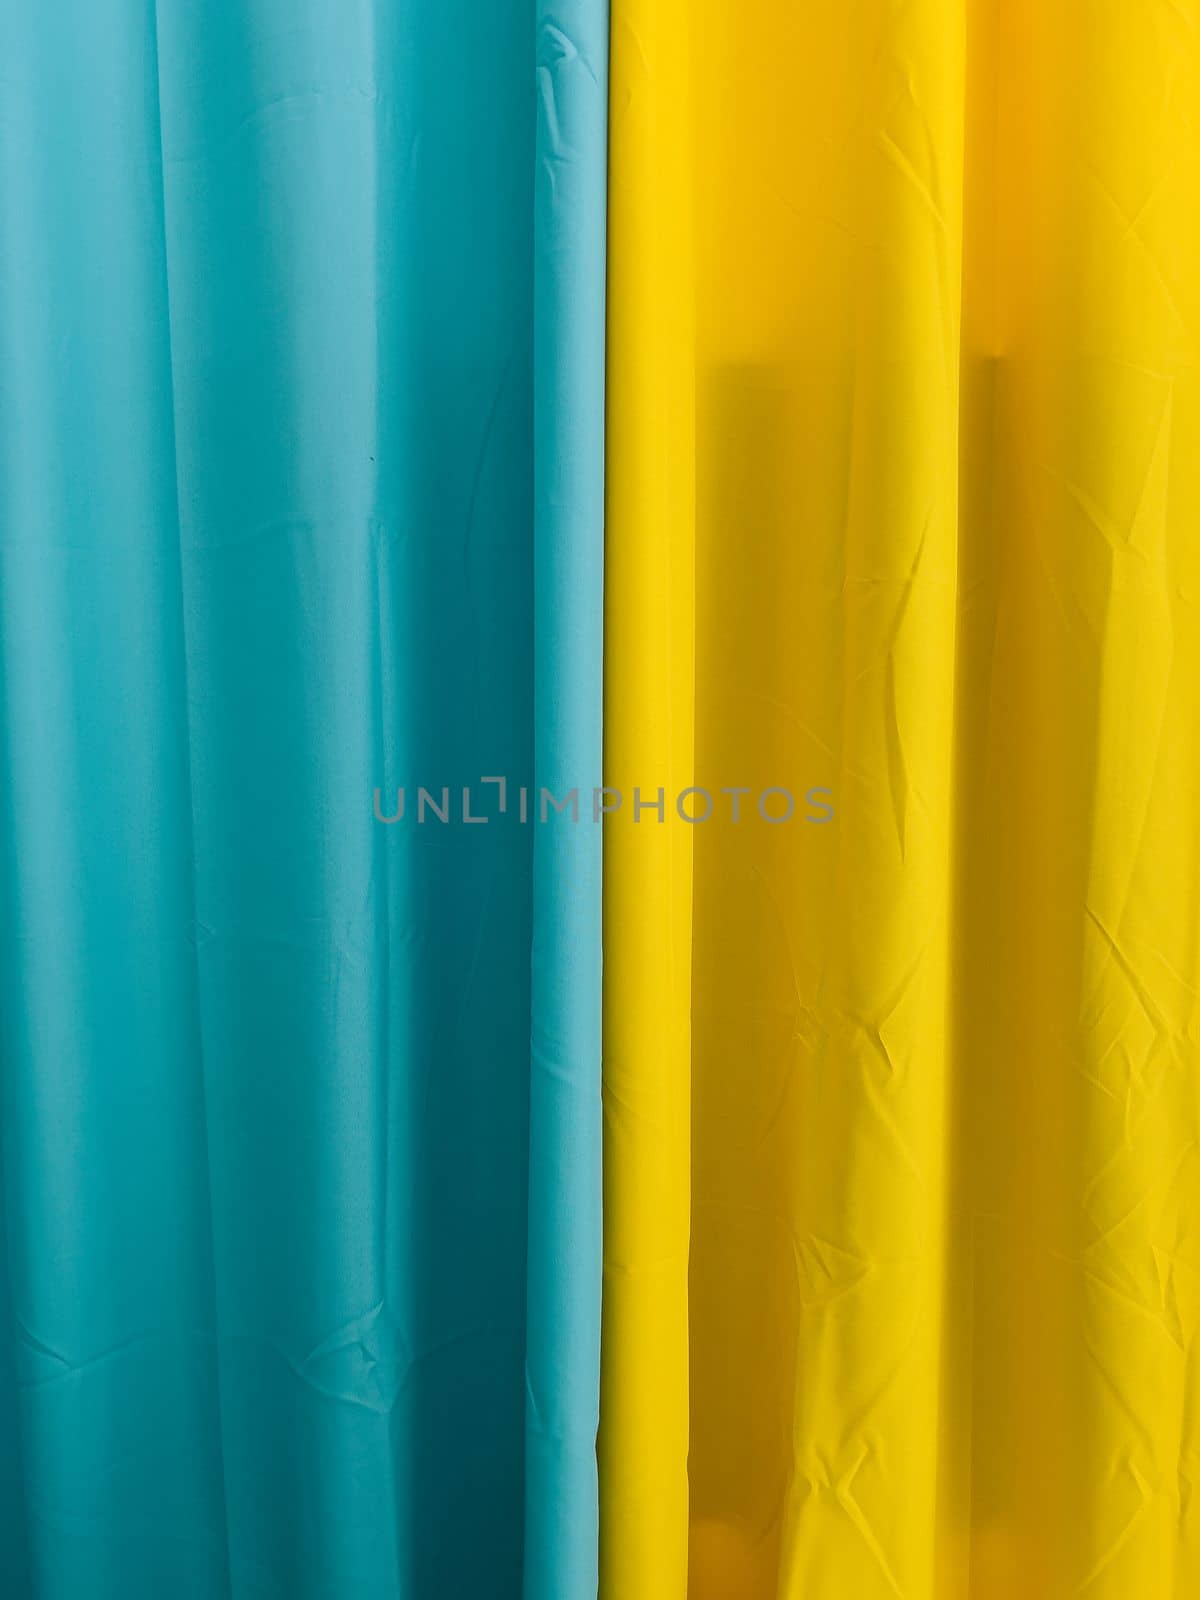 Blue and yellow textile curtains. Close-up. High quality photo